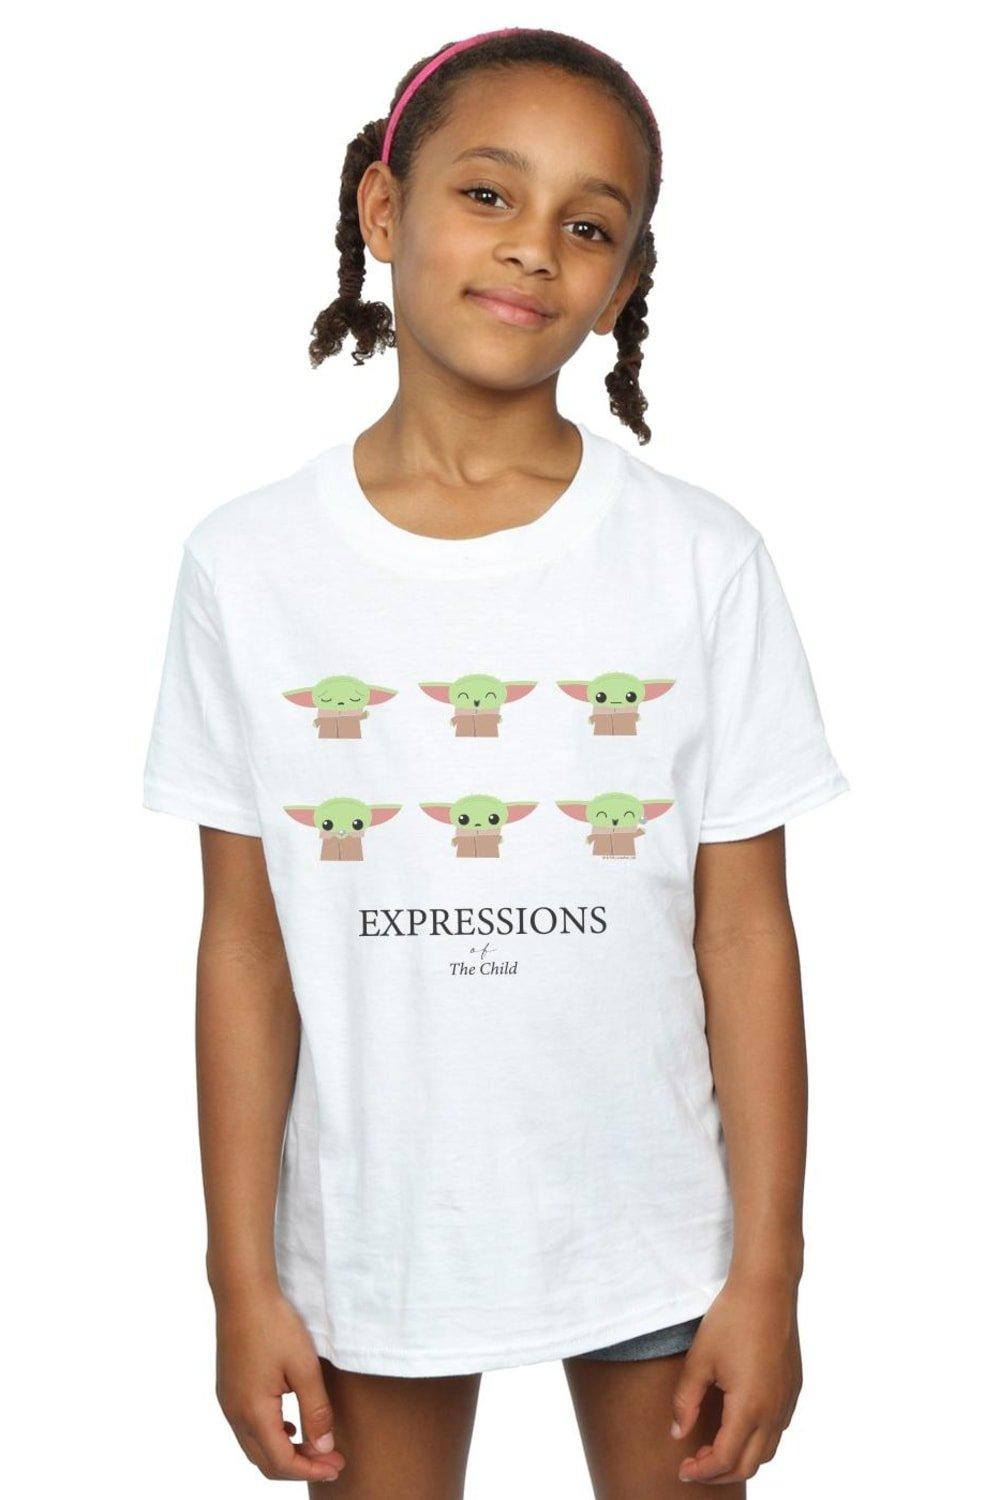 The Mandalorian Expressions Of The Child Cotton T-Shirt